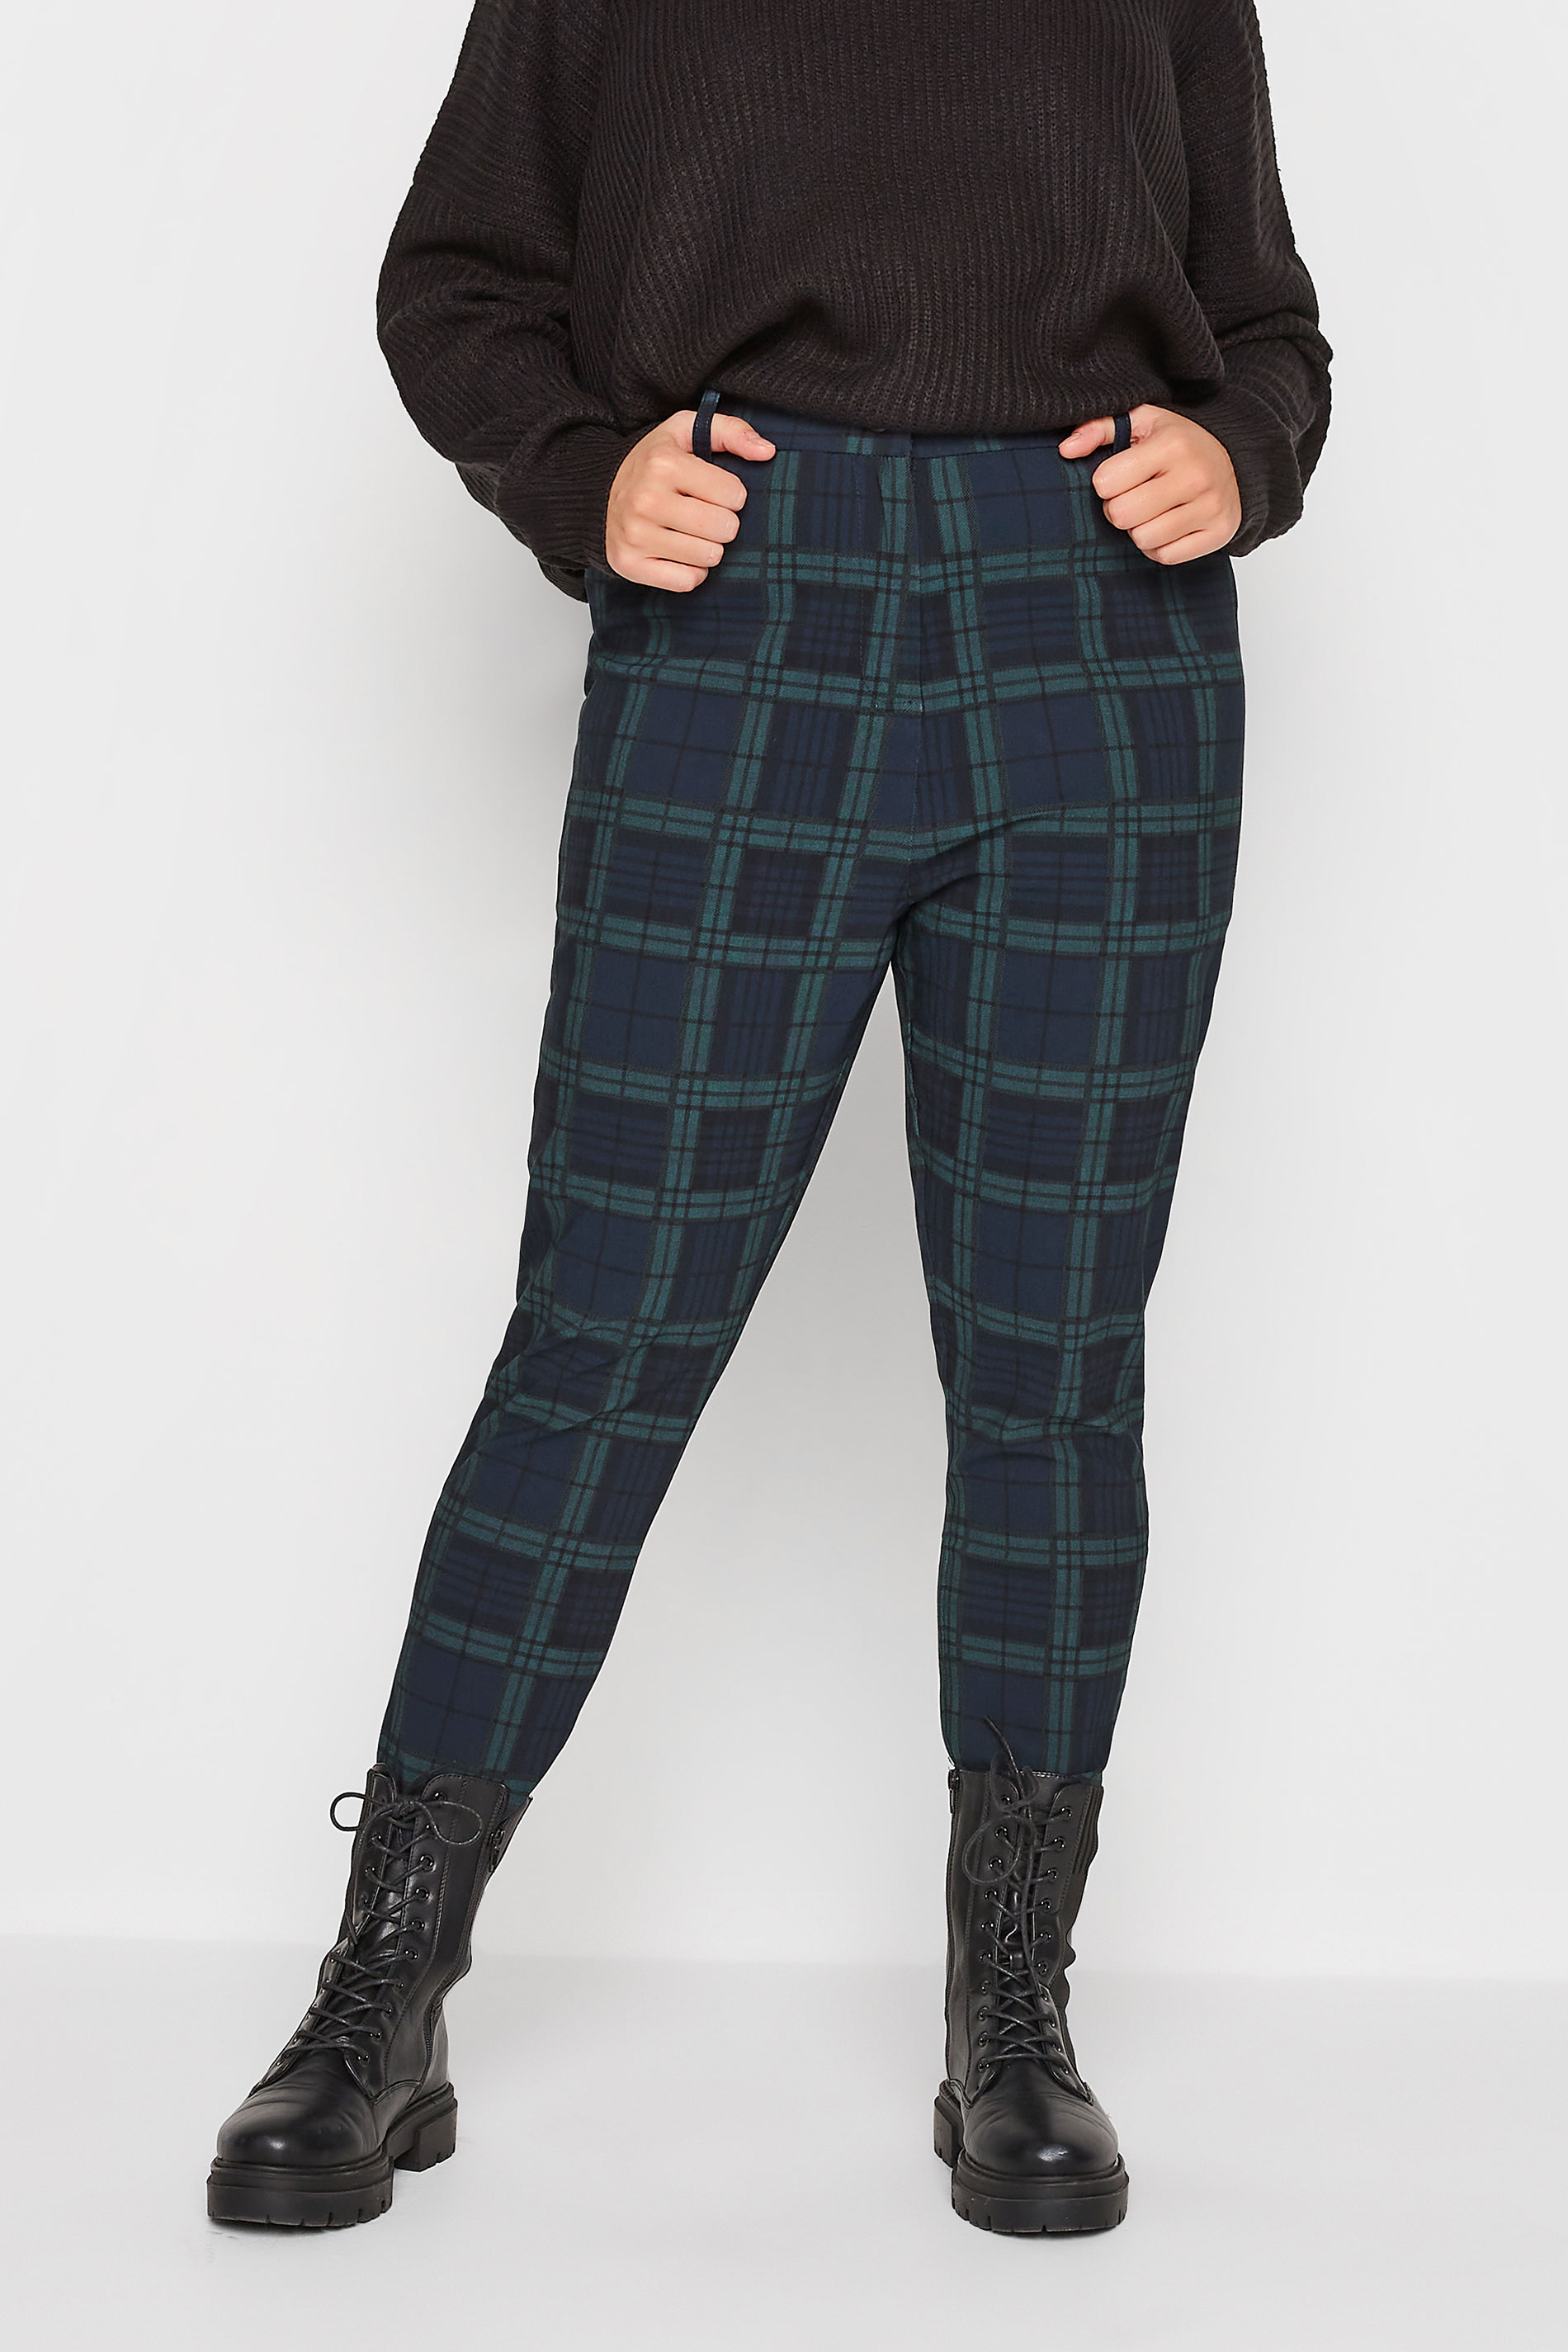 Plus Size Navy Blue & Green Check Print Bengaline Slim Leg Stretch Trousers | Yours Clothing 1